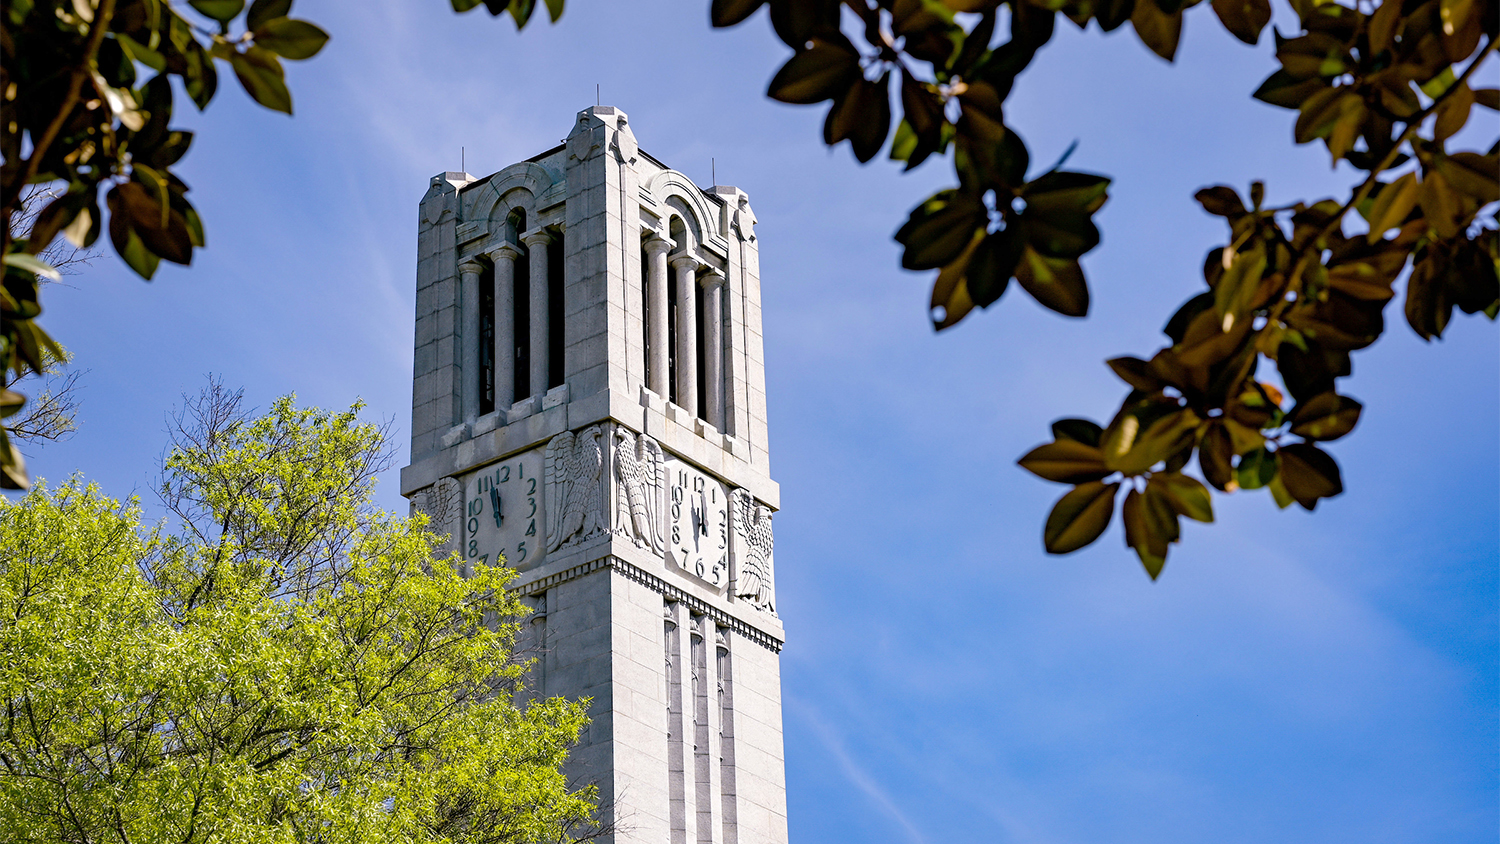 View of NC State belltower as viewed framed by several trees in the foreground and a bright blue sky behind.